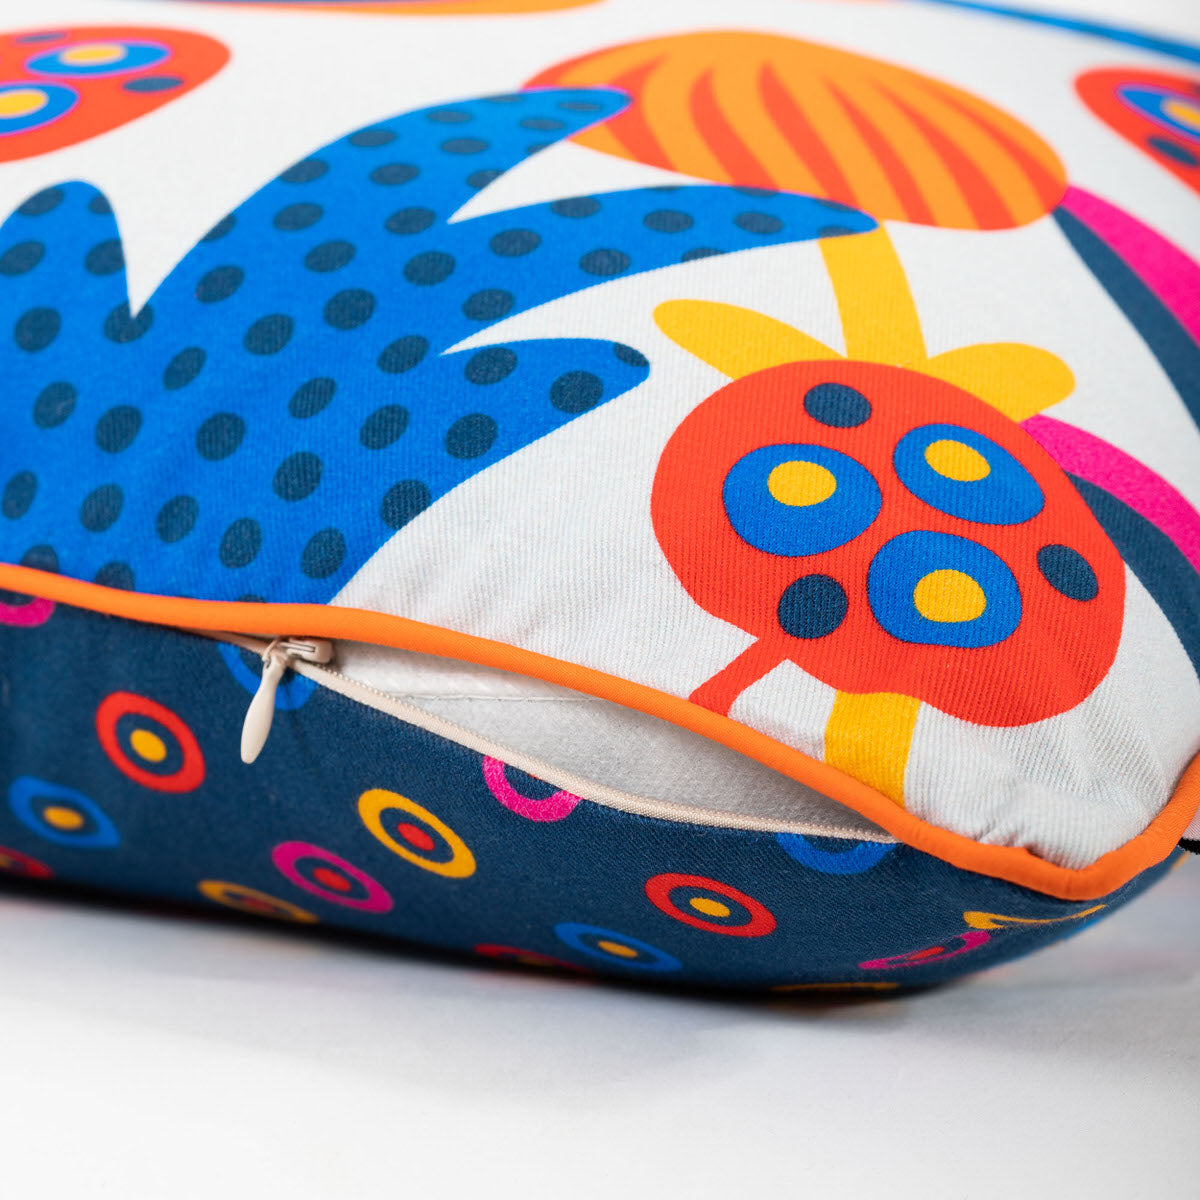 ALIEN JUNGLE - Bright and colourful double-sided cushion cover